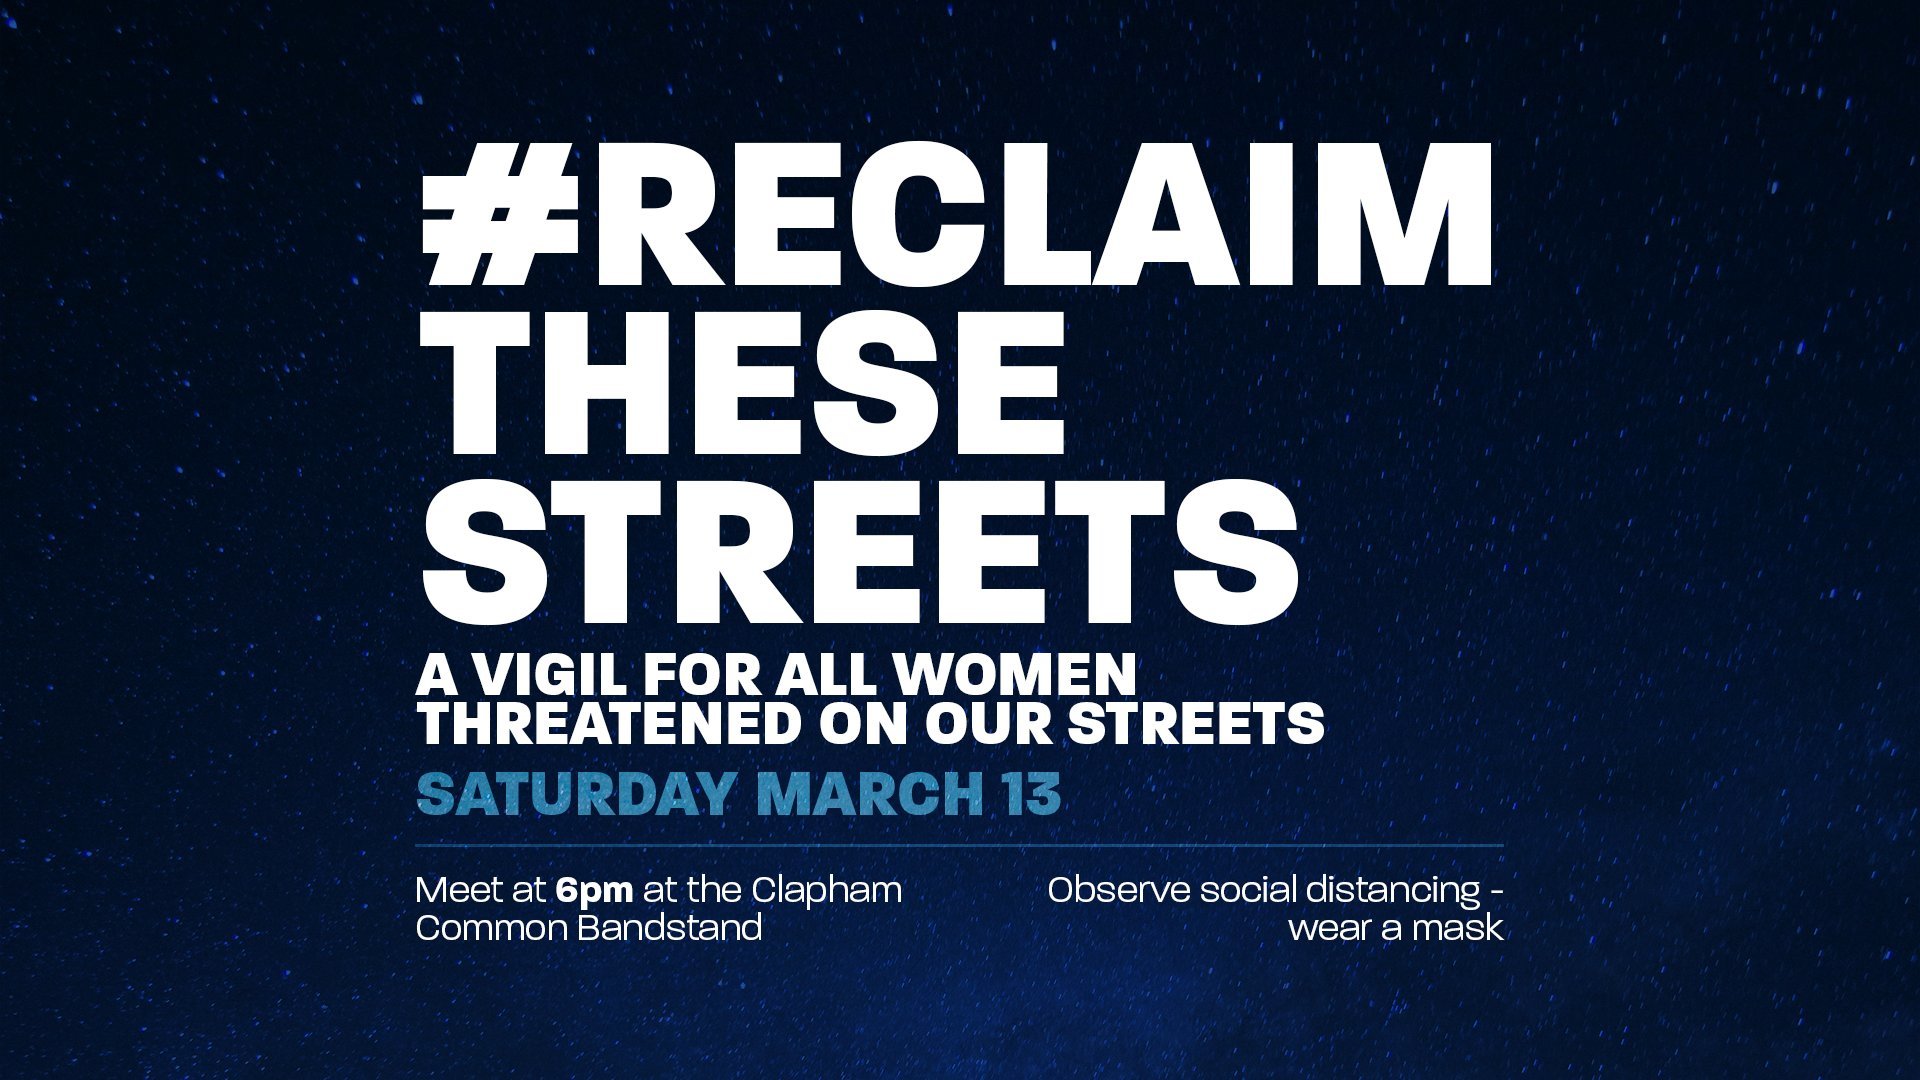 Relcaim These Streets event poster